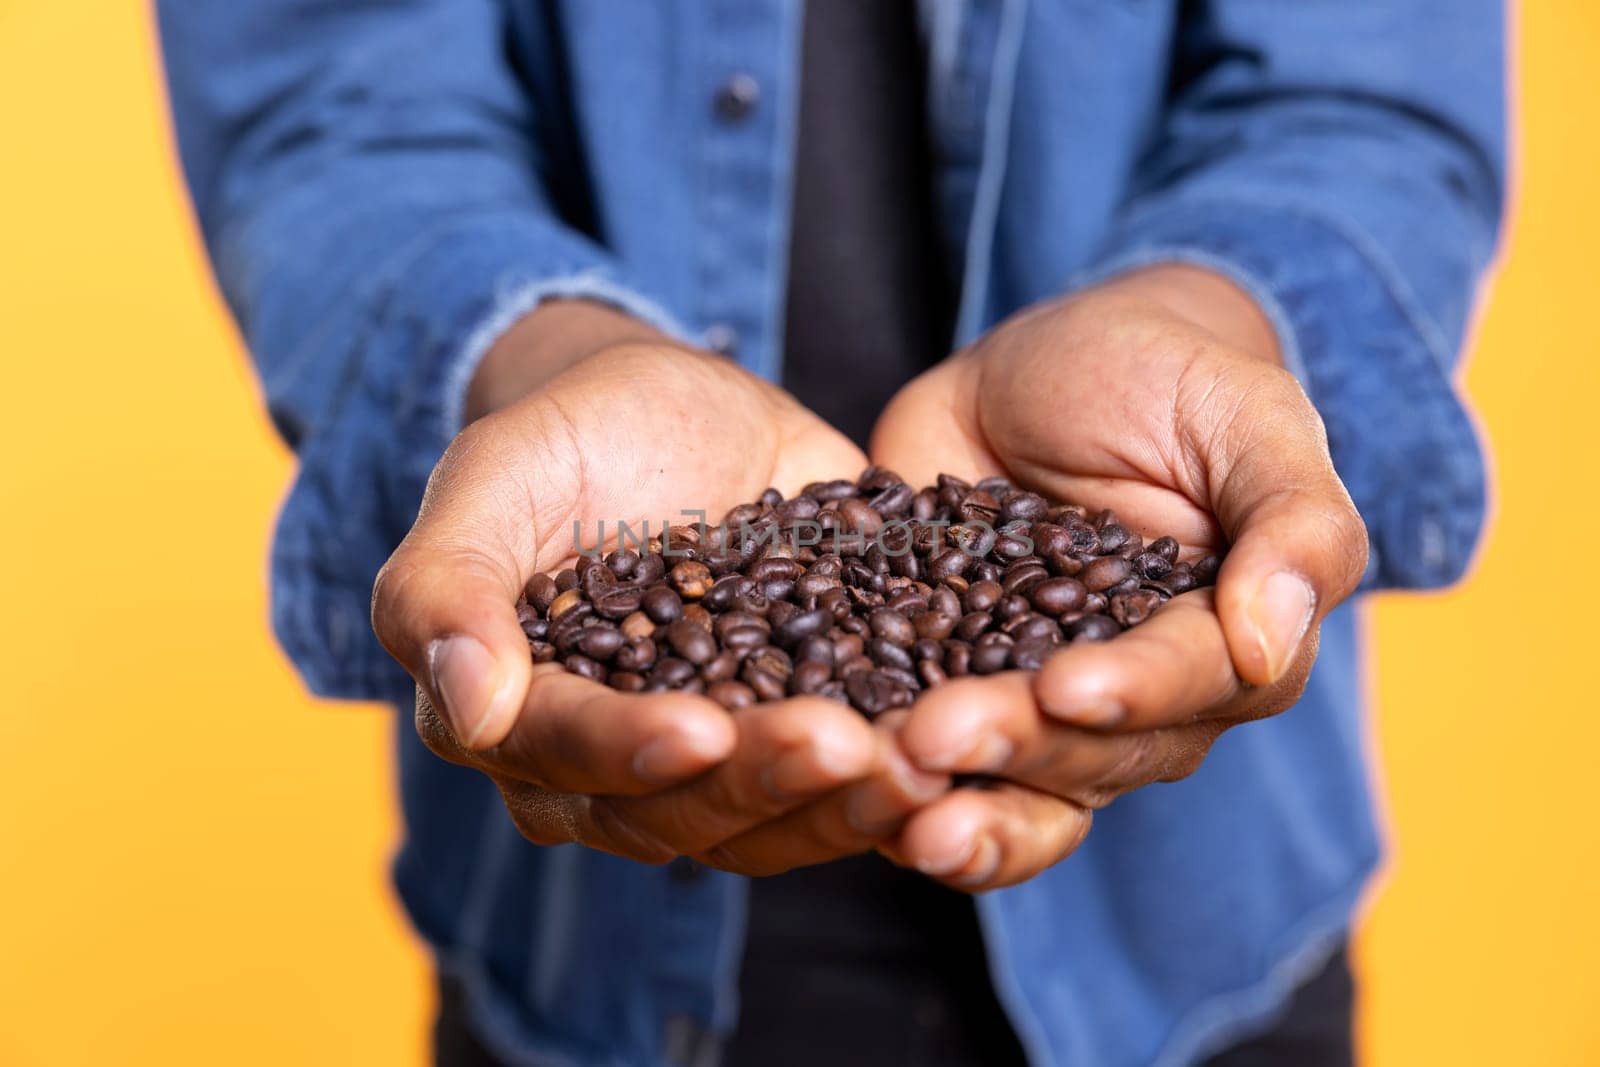 Coffee lover examining aromatic roasted beans against yellow background, promoting cold brew at a coffee shop or roastery. Enjoying freshness of delicious black seeds and grains. Close up.